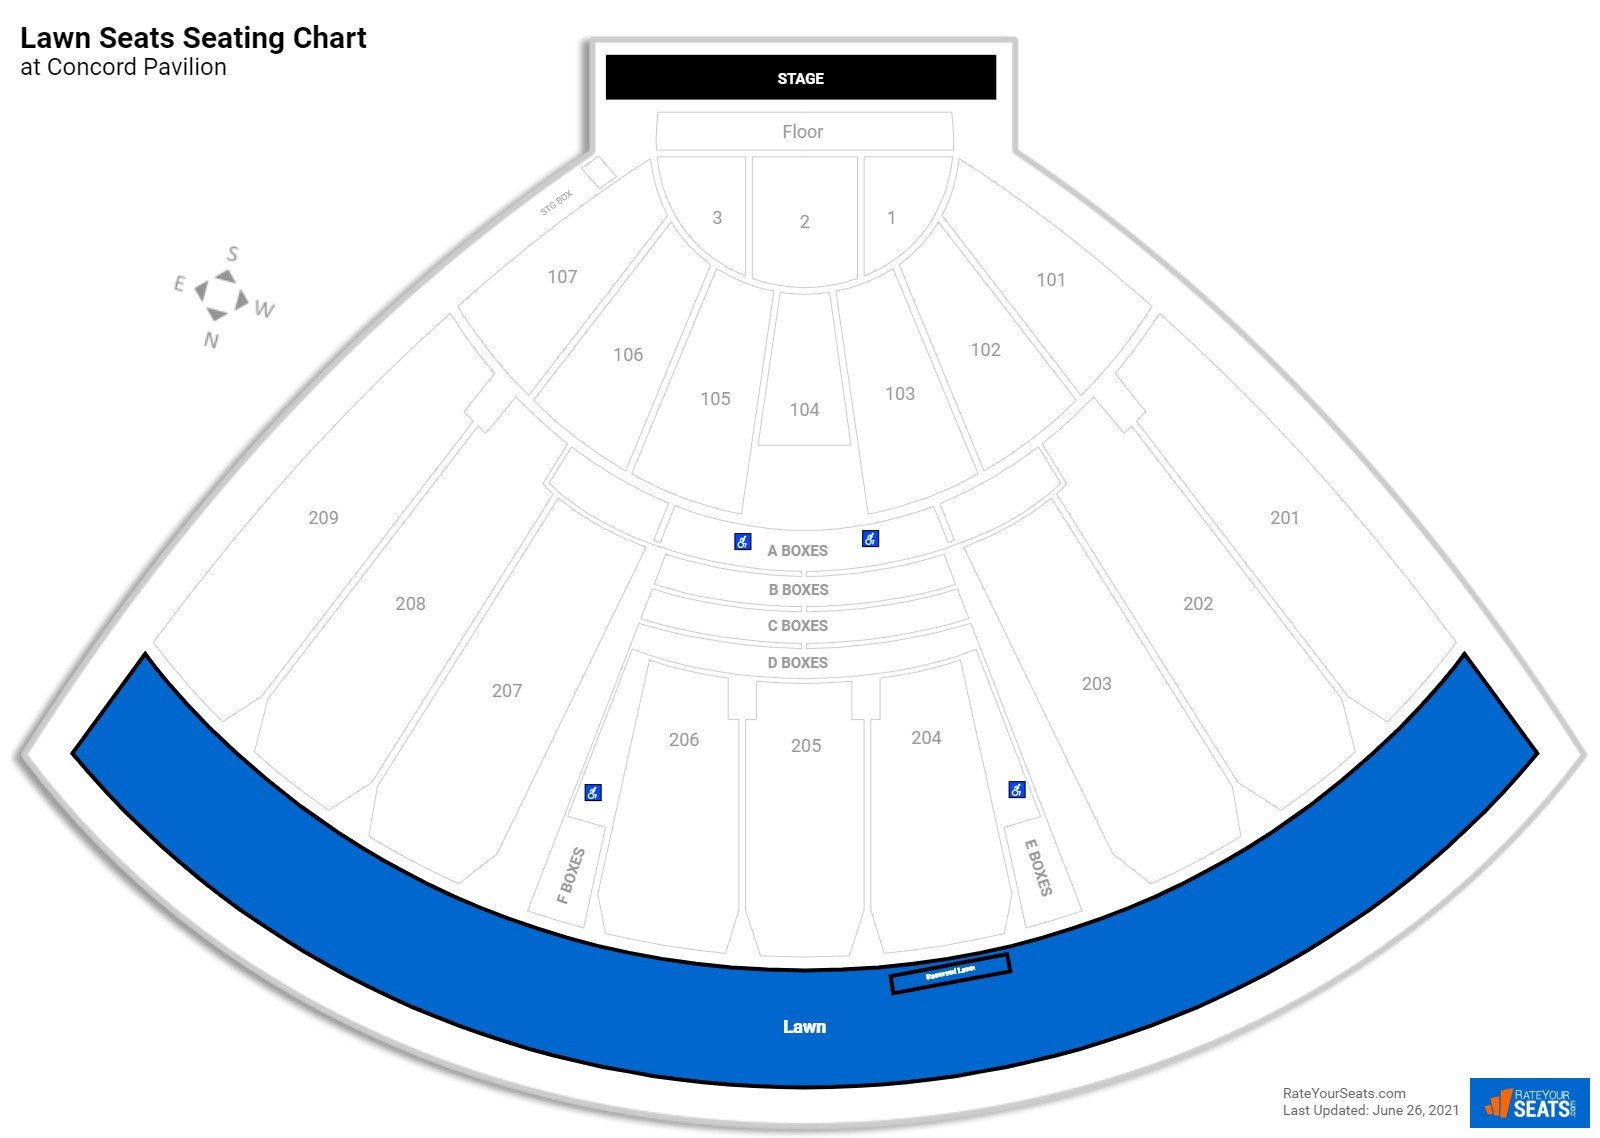 Concert Lawn Seats Seating Chart at Concord Pavilion